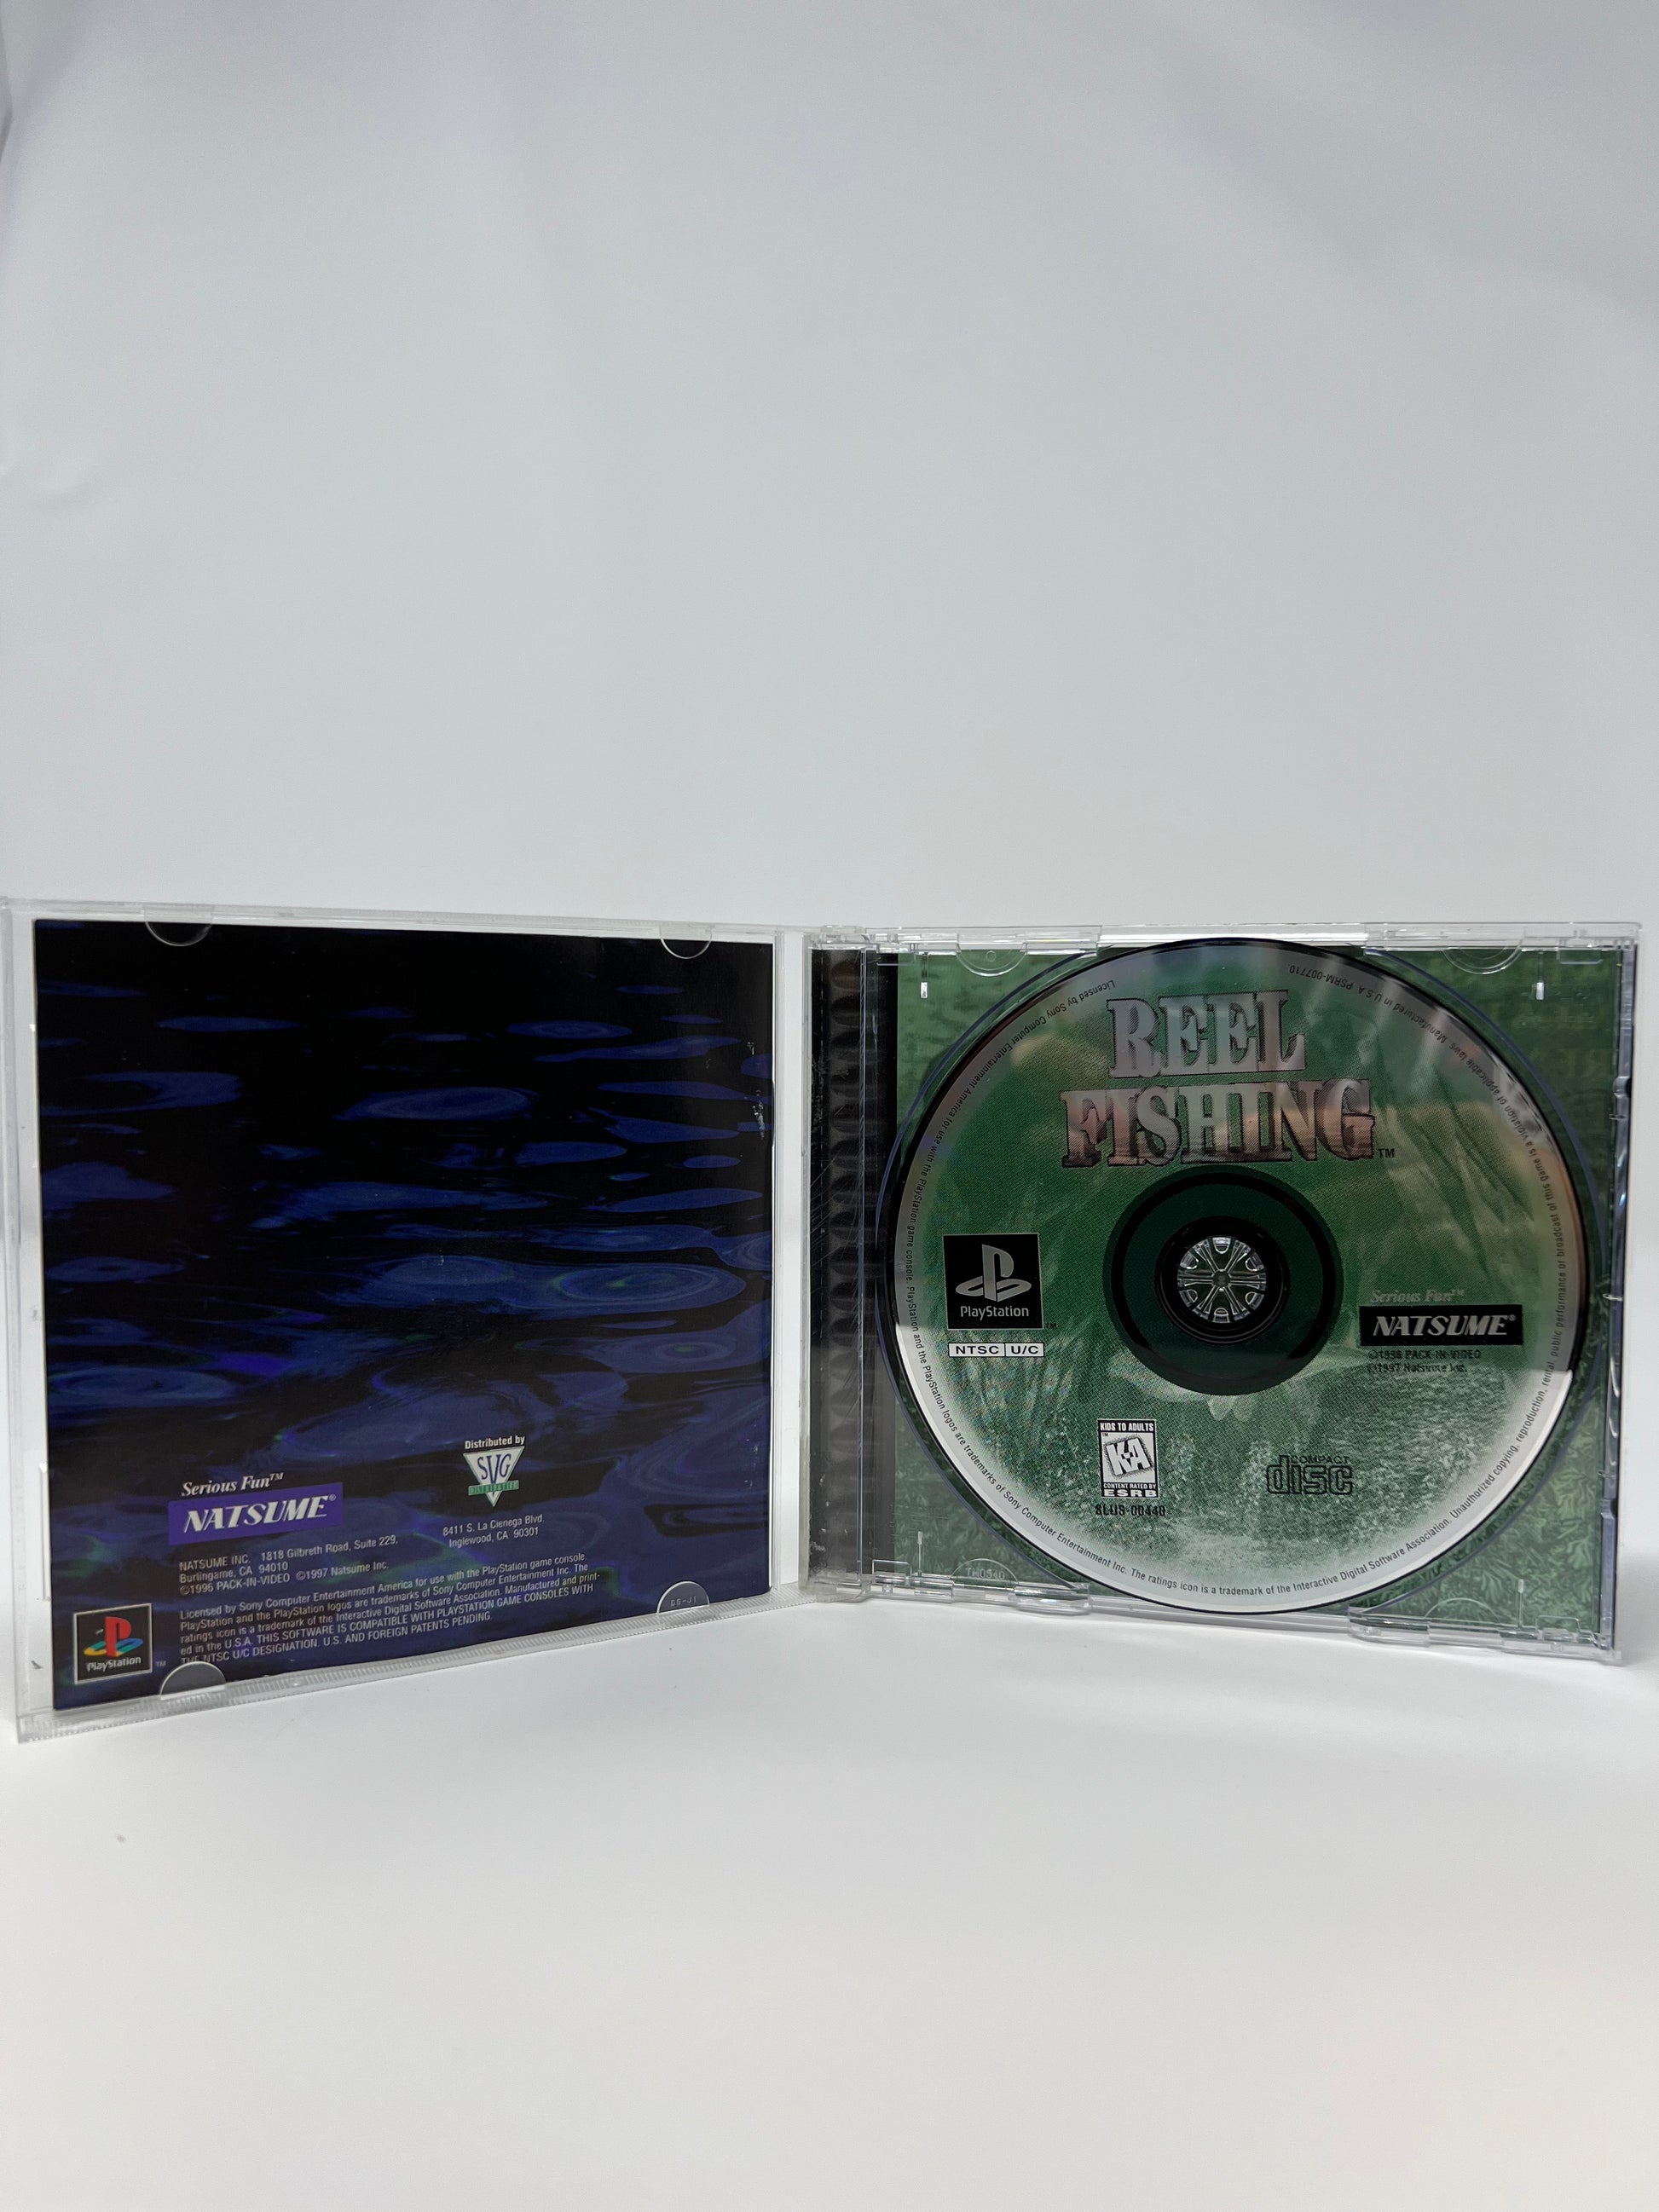 Reel Fishing - PS1 Game - Used